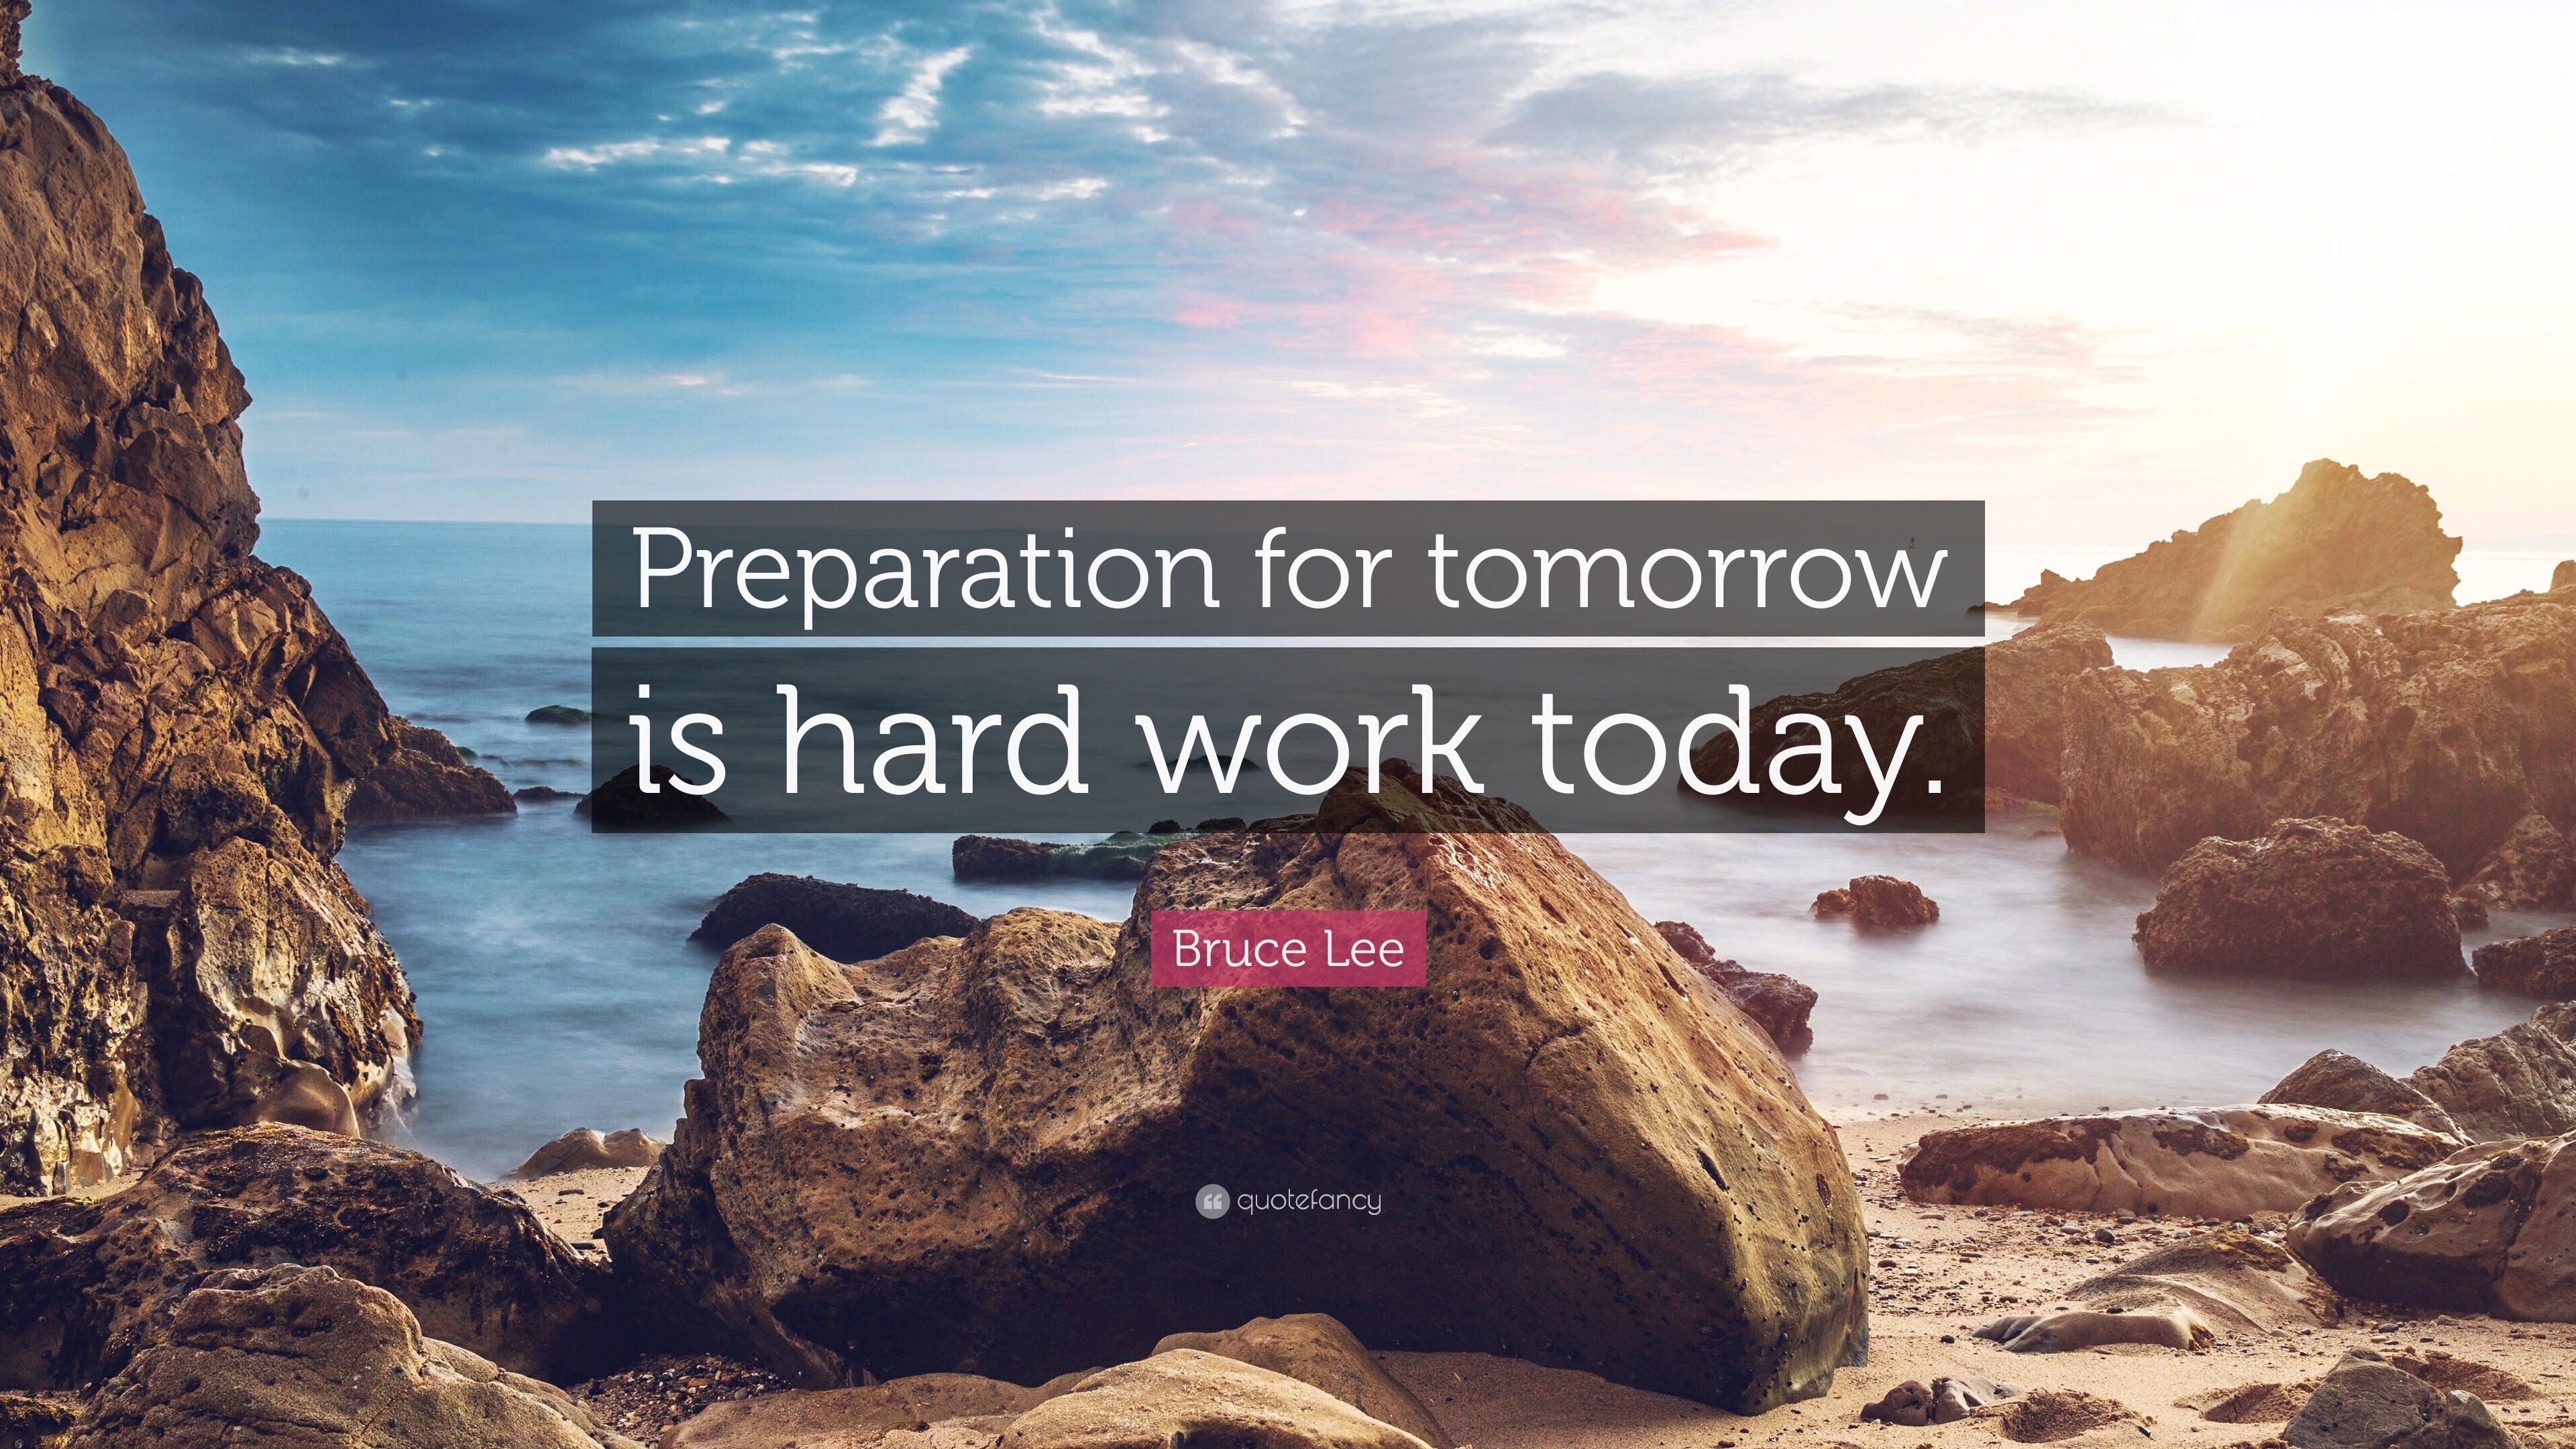 Bruce Lee Quote: “Preparation for tomorrow is hard work today.” (25